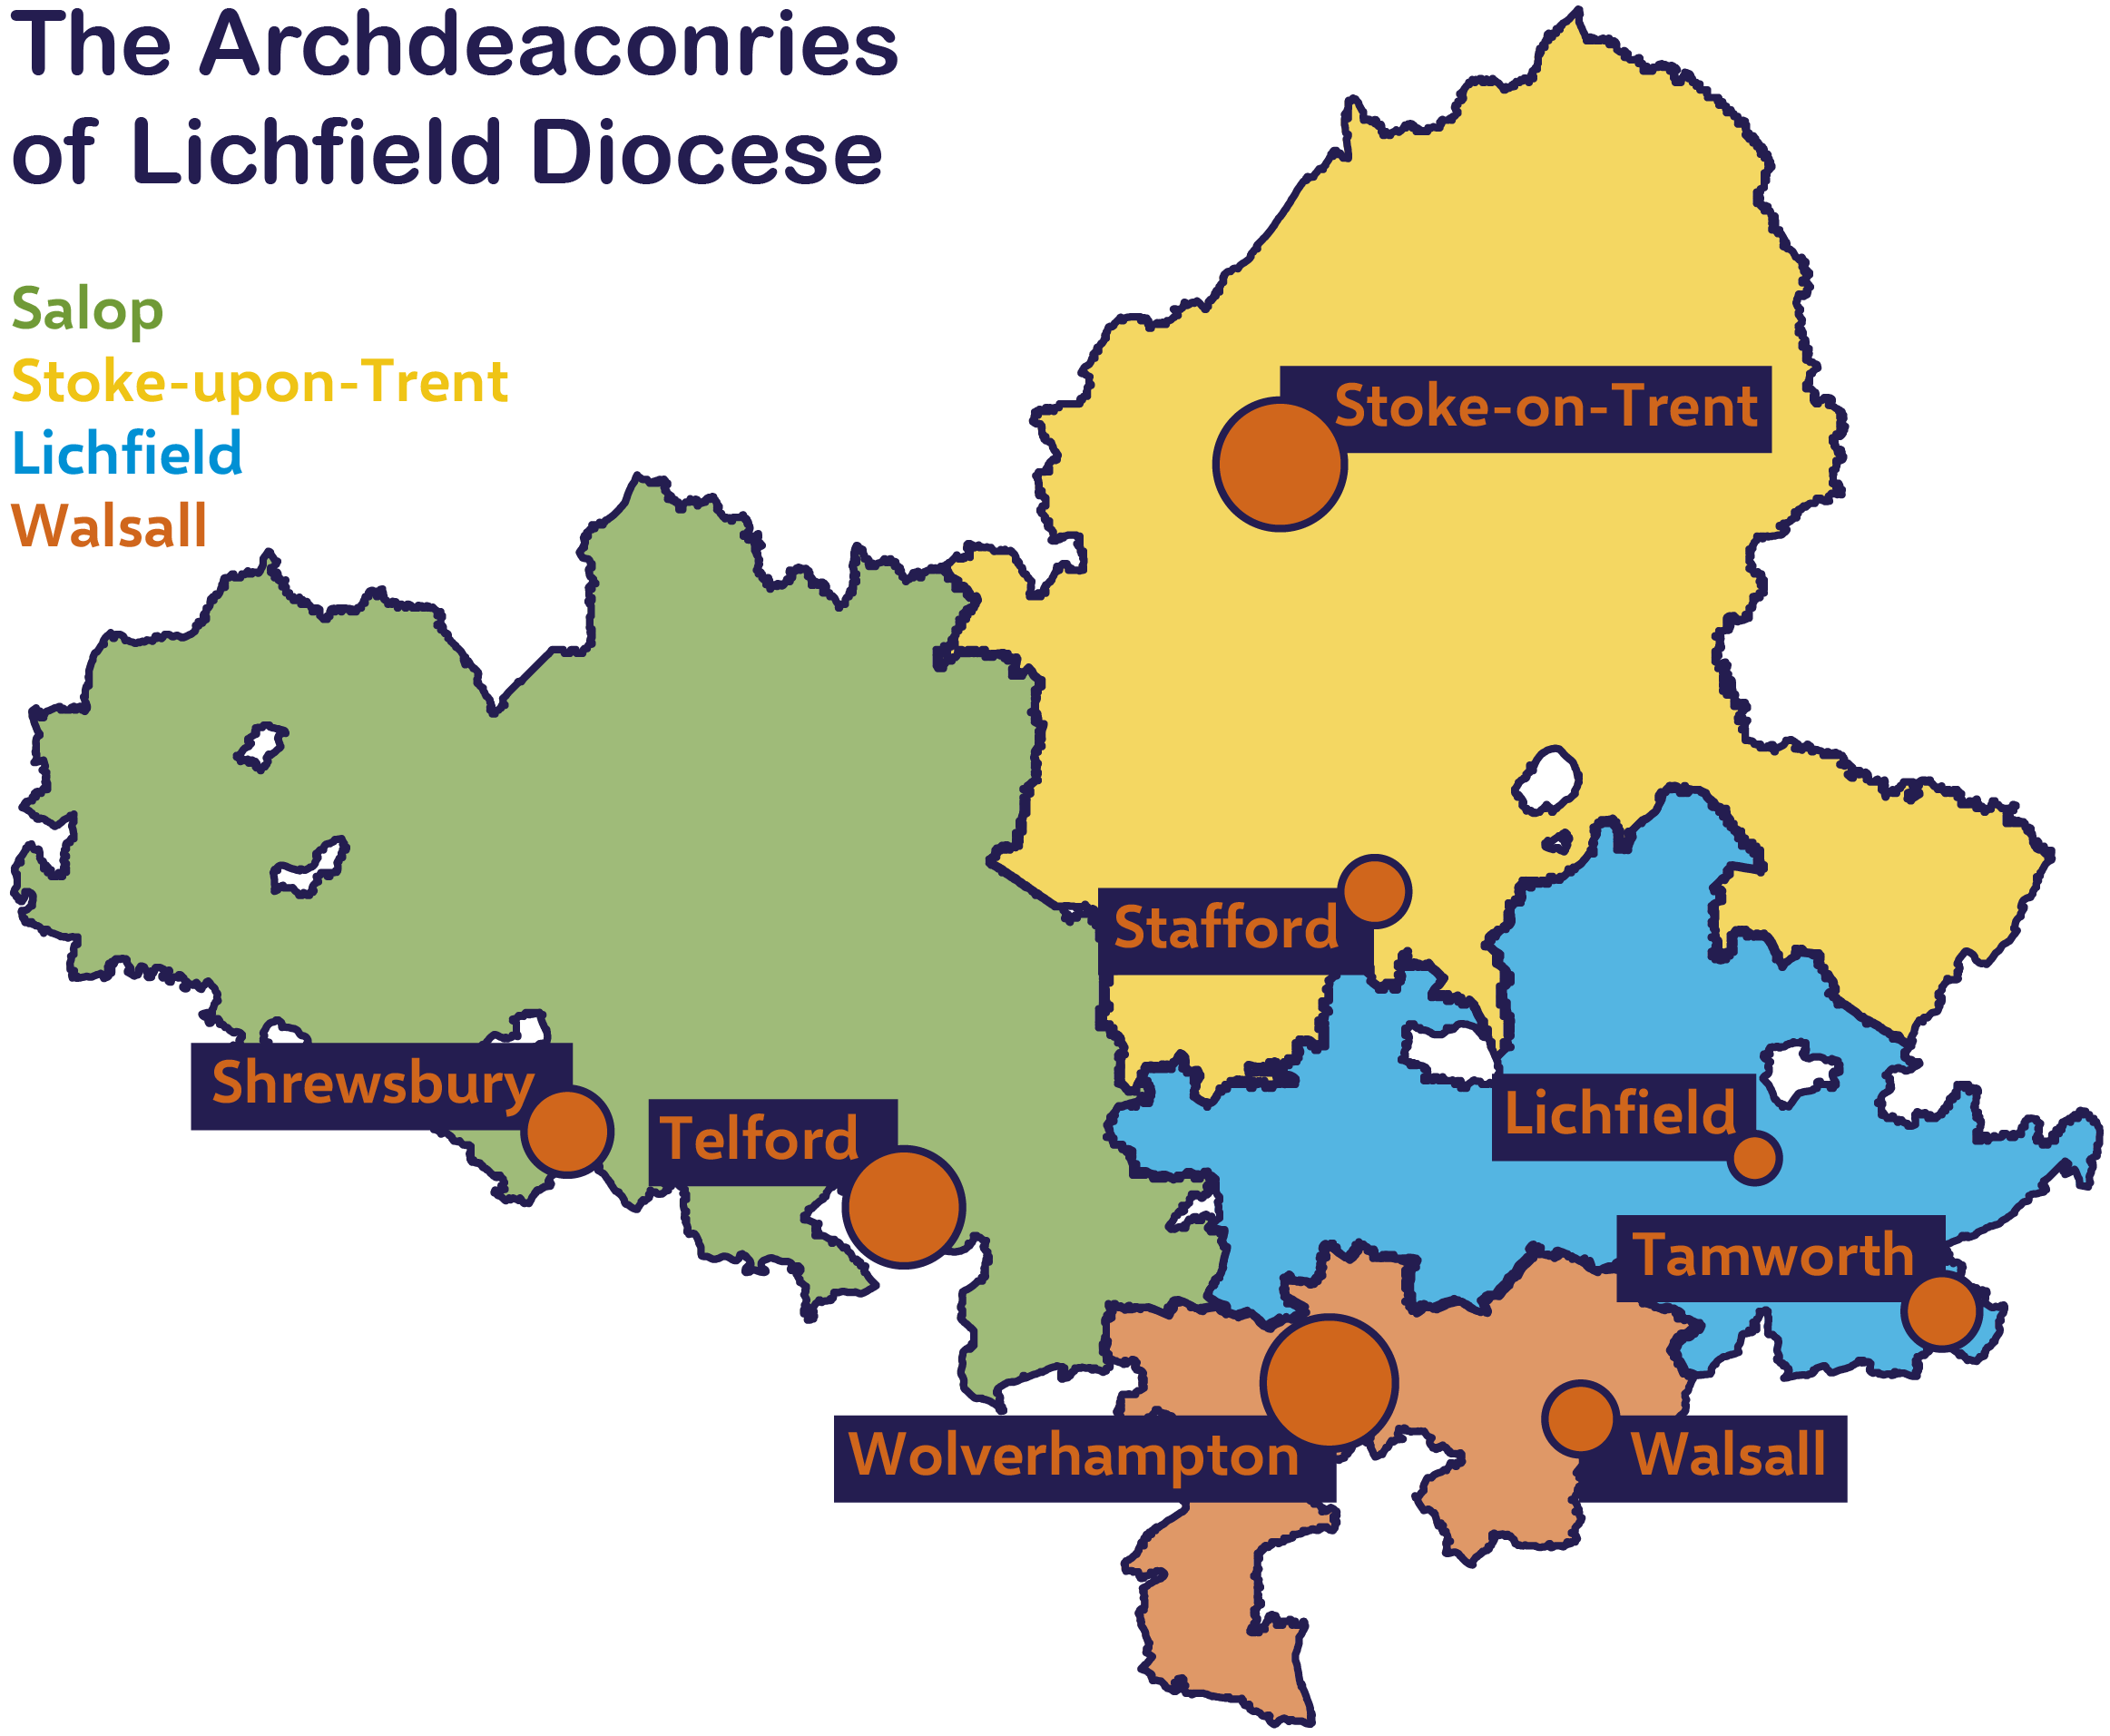 Map showing outline of the four archdeaconries of Lichfield Diocese and key towns